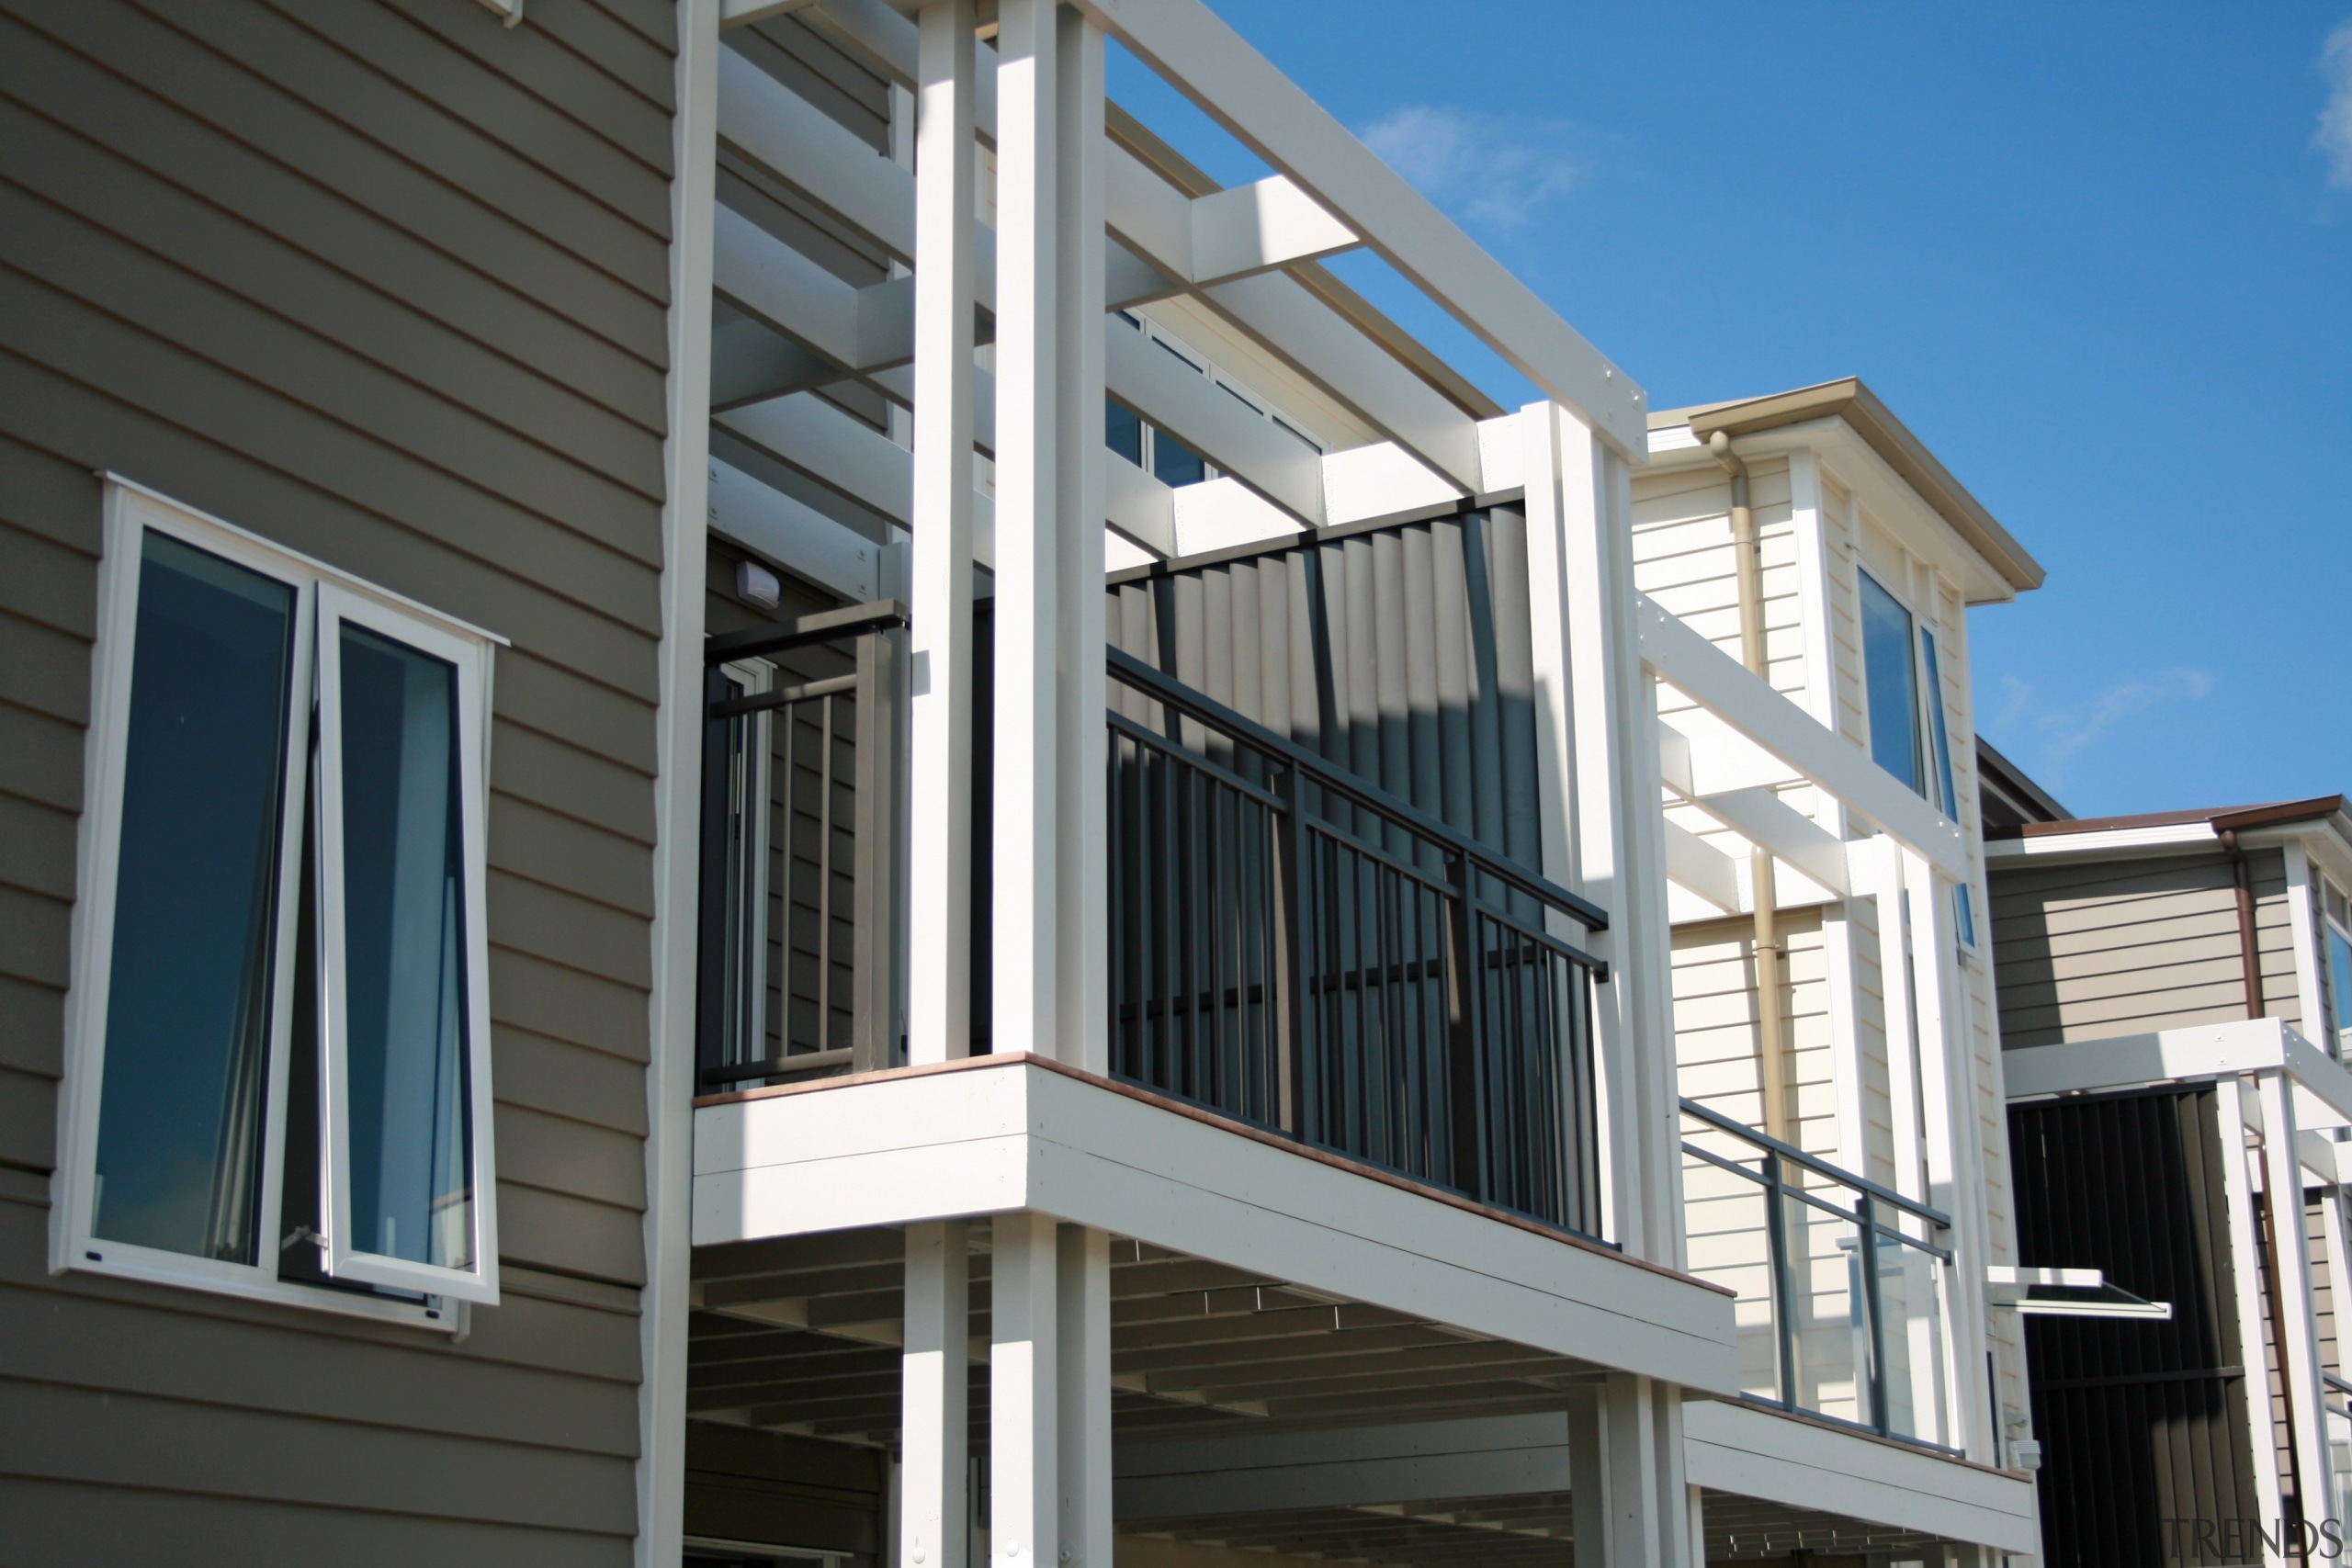 A mixture of Edge aluminium baluster and glass balcony, building, daylighting, deck, facade, handrail, house, outdoor structure, porch, siding, structure, window, black, gray